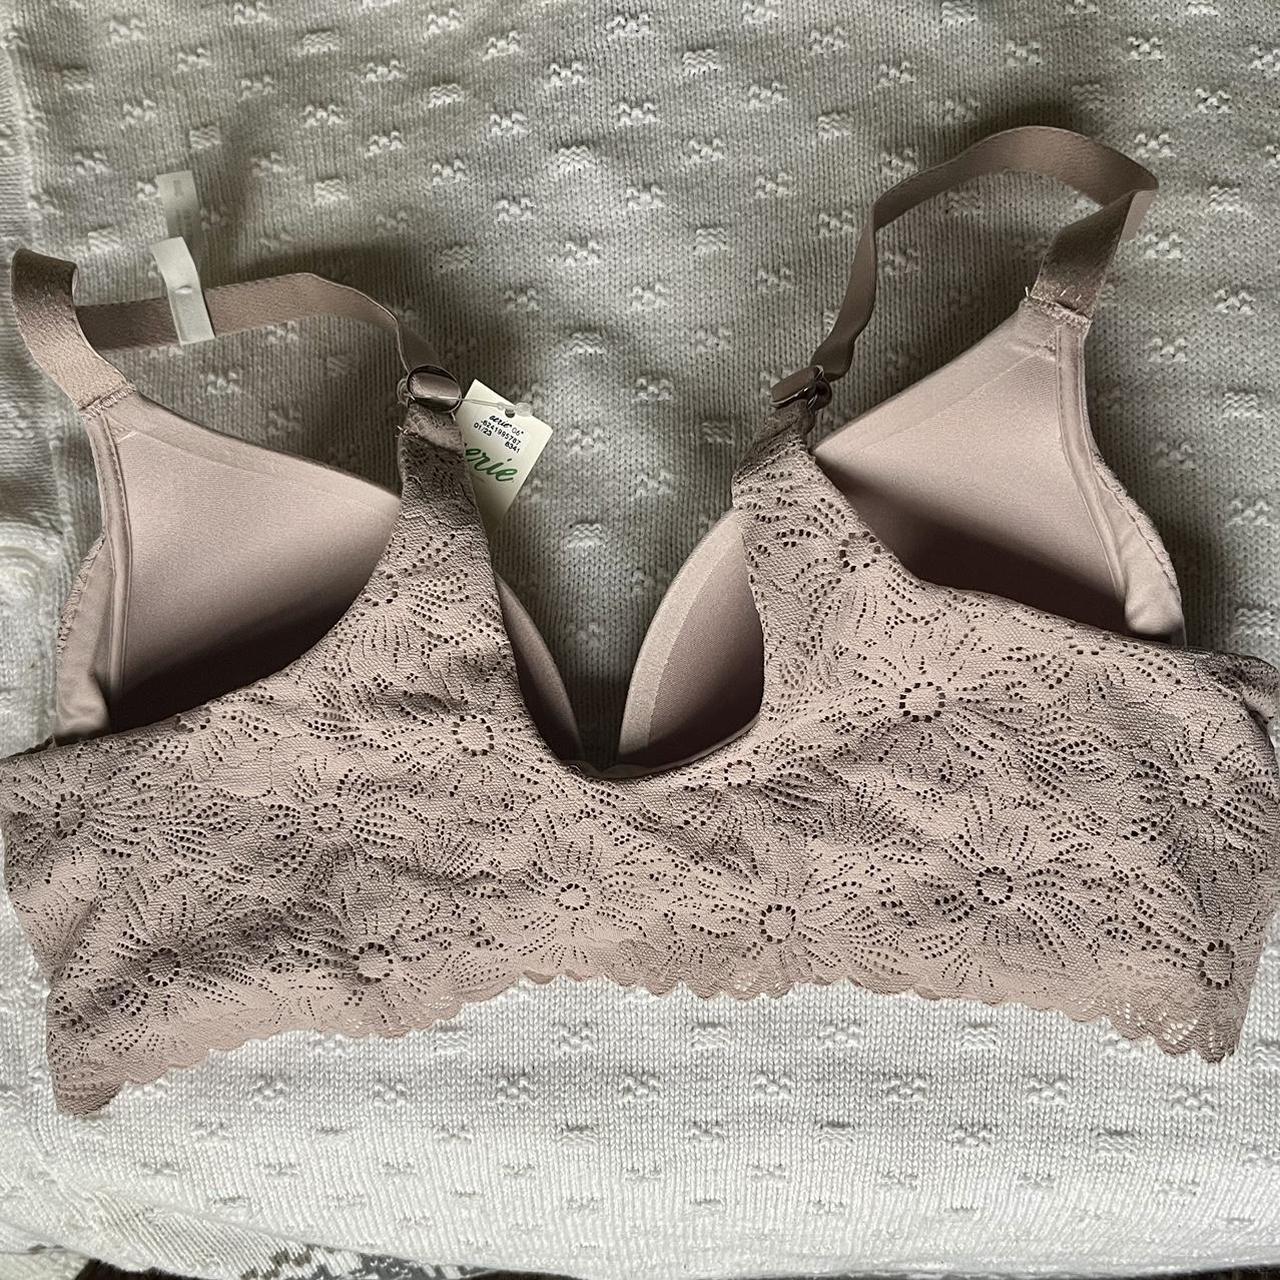 aerie, Intimates & Sleepwear, Aerie Wireless Sans Armature Bra Lace  Straps Gray New Without Tags